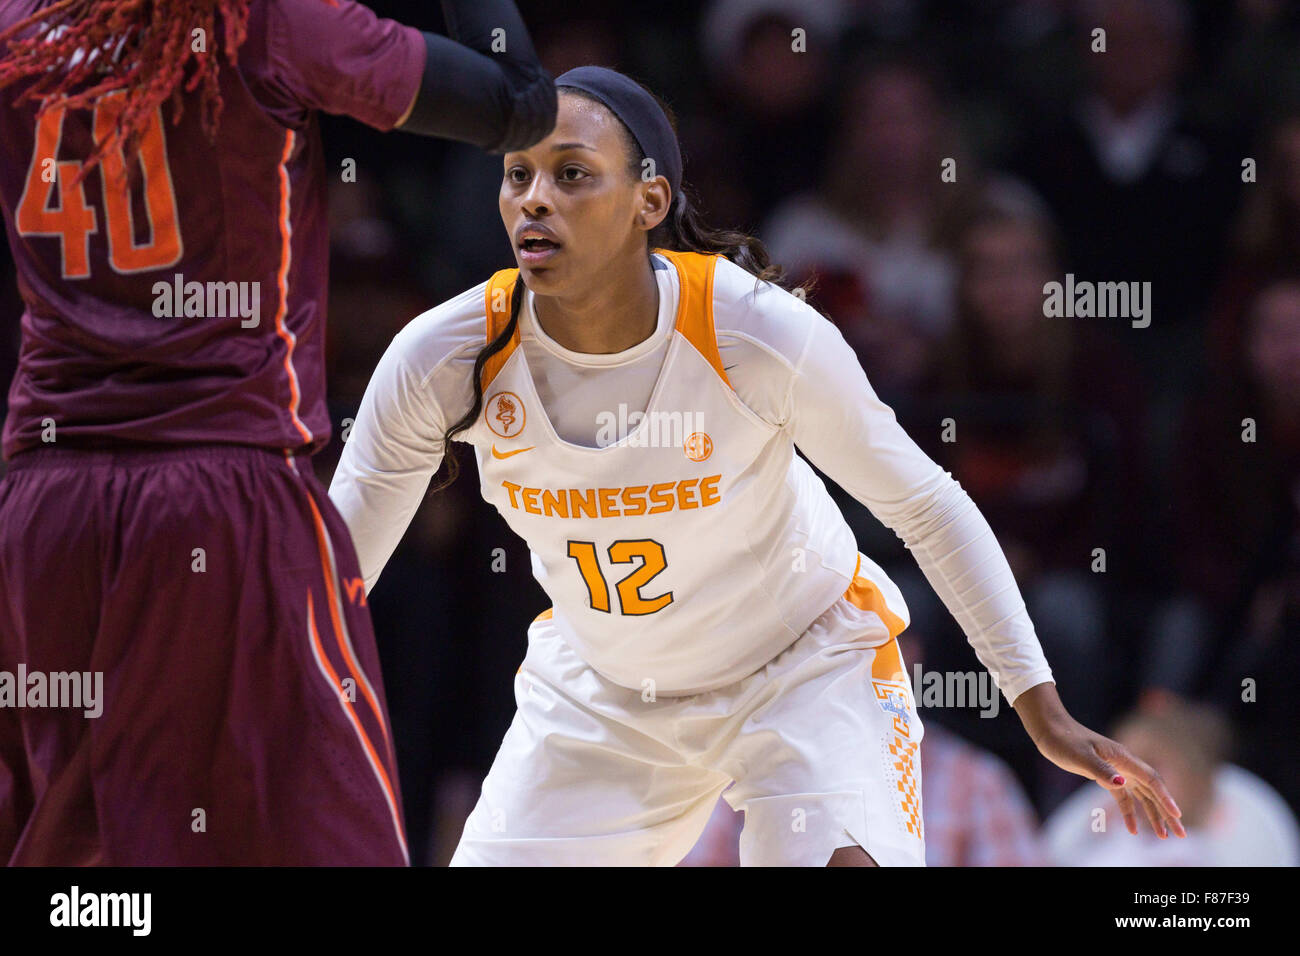 December 6, 2015: Bashaara Graves #12 of the Tennessee Lady Volunteers defends during the NCAA basketball game between the University of Tennessee Lady Volunteers and the Virginia Tech Hokies at Thompson Boling Arena in Knoxville TN Tim Gangloff/CSM Stock Photo